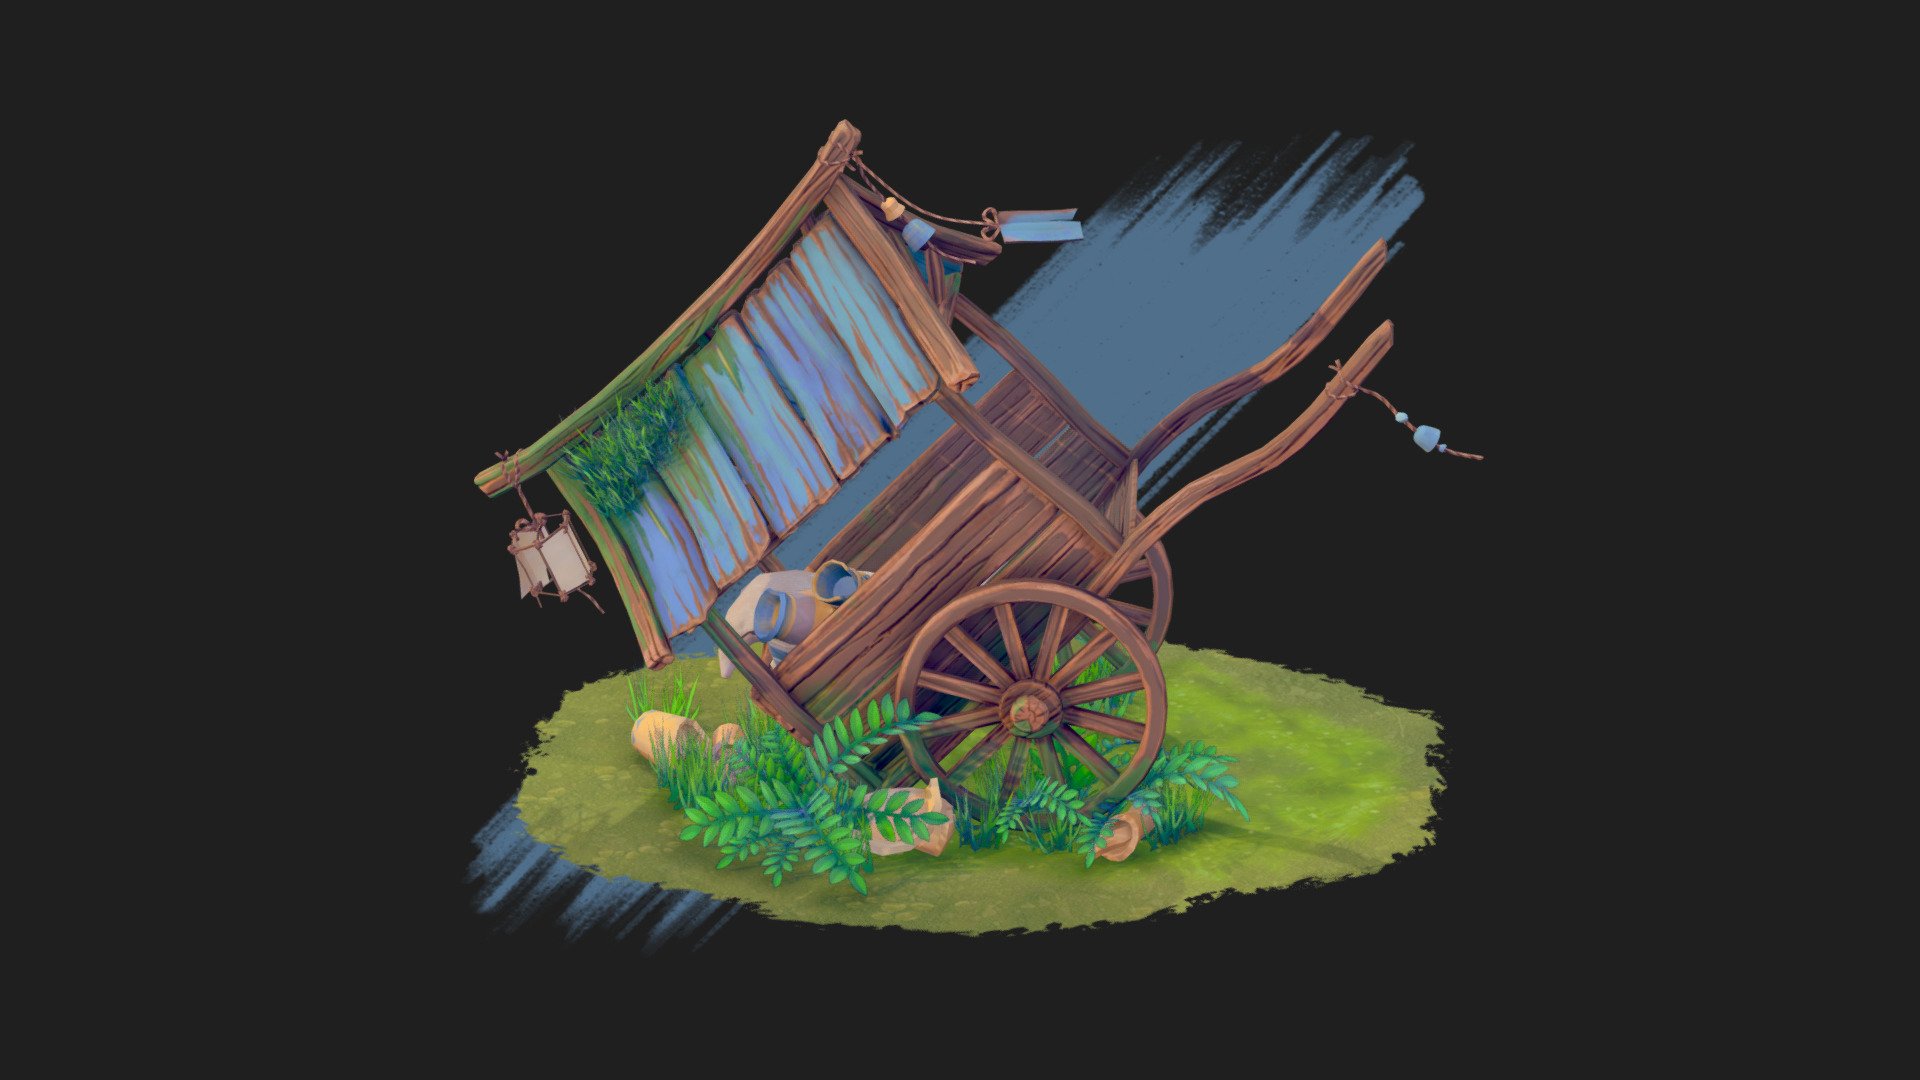 Artstation post: https://www.artstation.com/artwork/PX2N3Z

For my week 10 CGMA Stylized Game Assets course assignment, I designed and created a cart asset inspired by Kena: Bridge of Spirits made by Ember Lab. I made the concept for the cart in Krita, then sculpted it in Zbrush, 3D modeled it in Blender, and textured it with Substance Painter. My aim was to make sure that the asset would fit in with the game's environment and art style.
Overall, I'm happy with the result. Hope you like it! ^^ - Wooden Cart - 3D model by Maria Ioana (@MariaIoana) 3d model